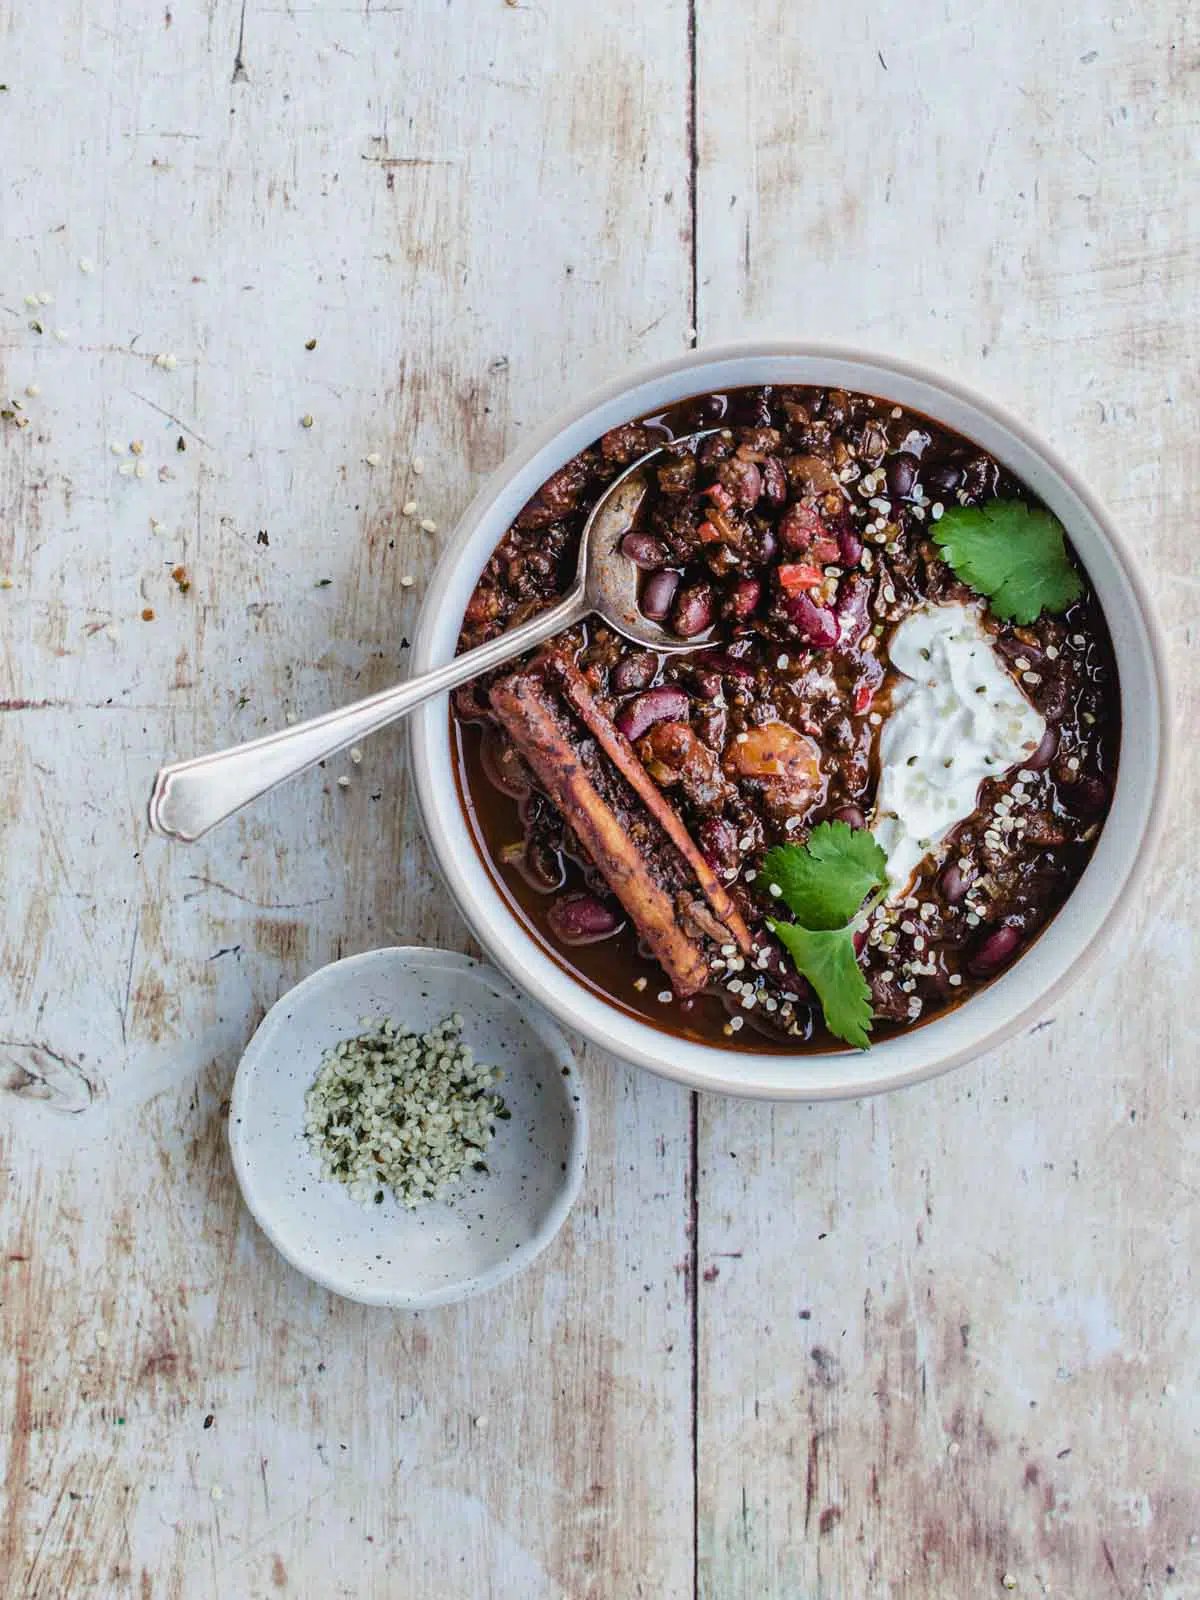 A bowl of chilli and a bowl of hemp seeds on a wooden background.